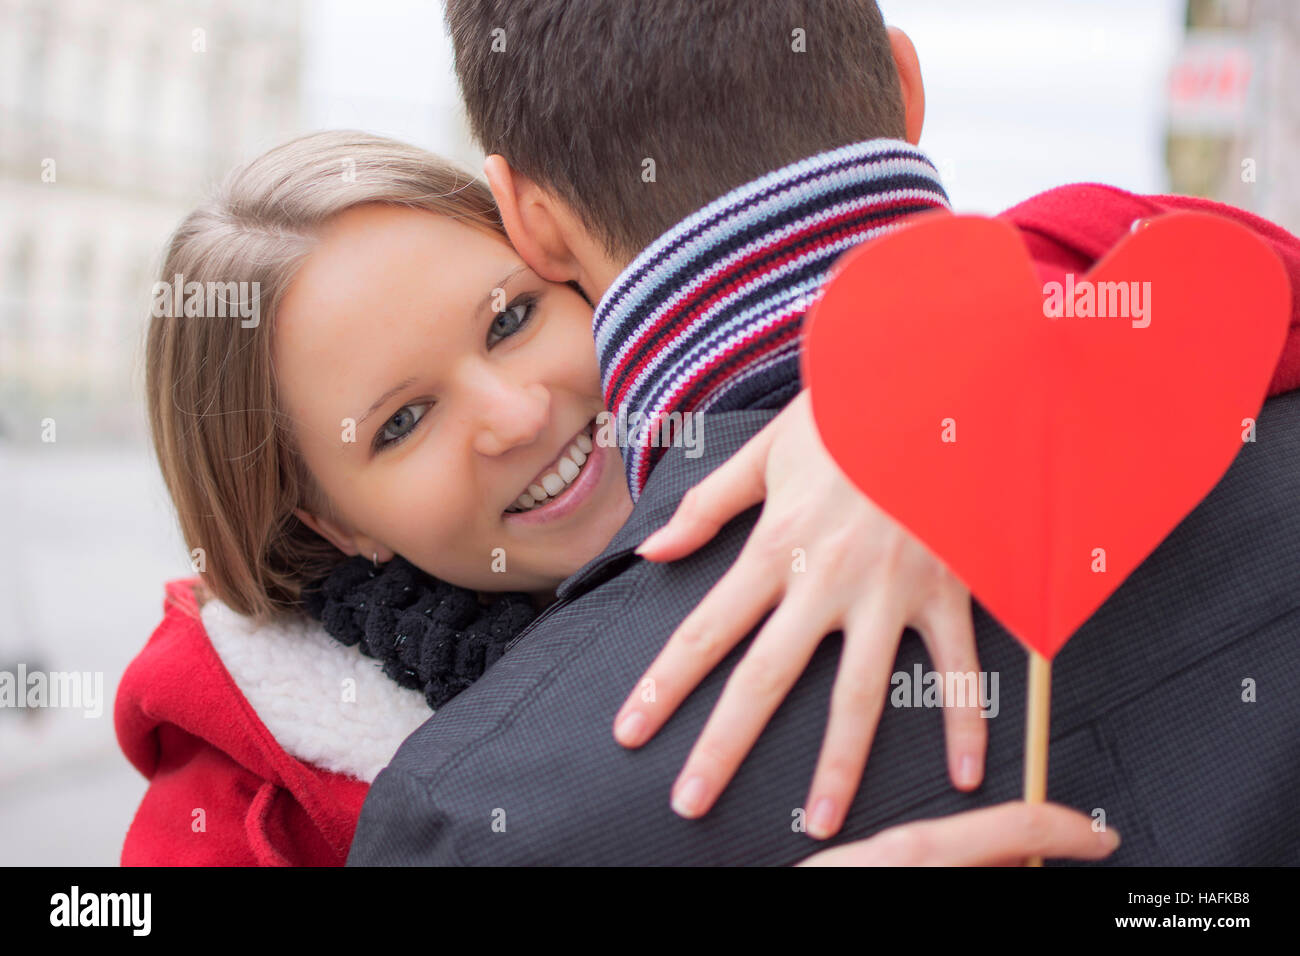 Man with his lovely sweetheart girl kiss at Lover's valentine day.  Valentine Couple. Couple kiss and hug. On background red balloons hearts.  Love concept. Happy smile girl. Lovers touch foreheads Photos